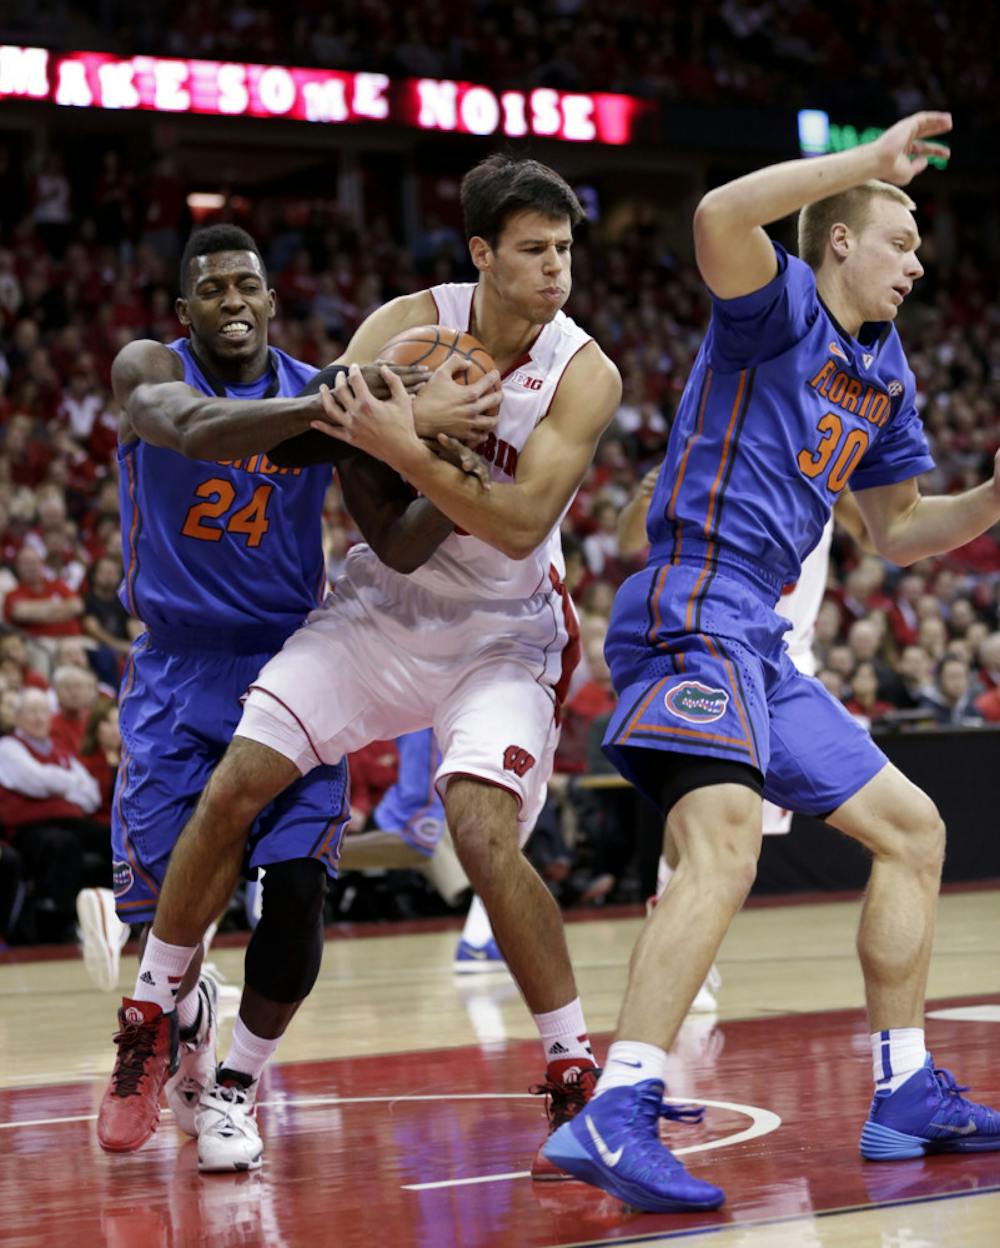 <p>Wisconsin’s Duje Dukan (center) grabs a rebound from Florida’s Casey Prather (left) and Jacob Kurtz during the Badgers’ 59-53 victory against the Gators in Madison, Wis., on Tuesday night.</p>